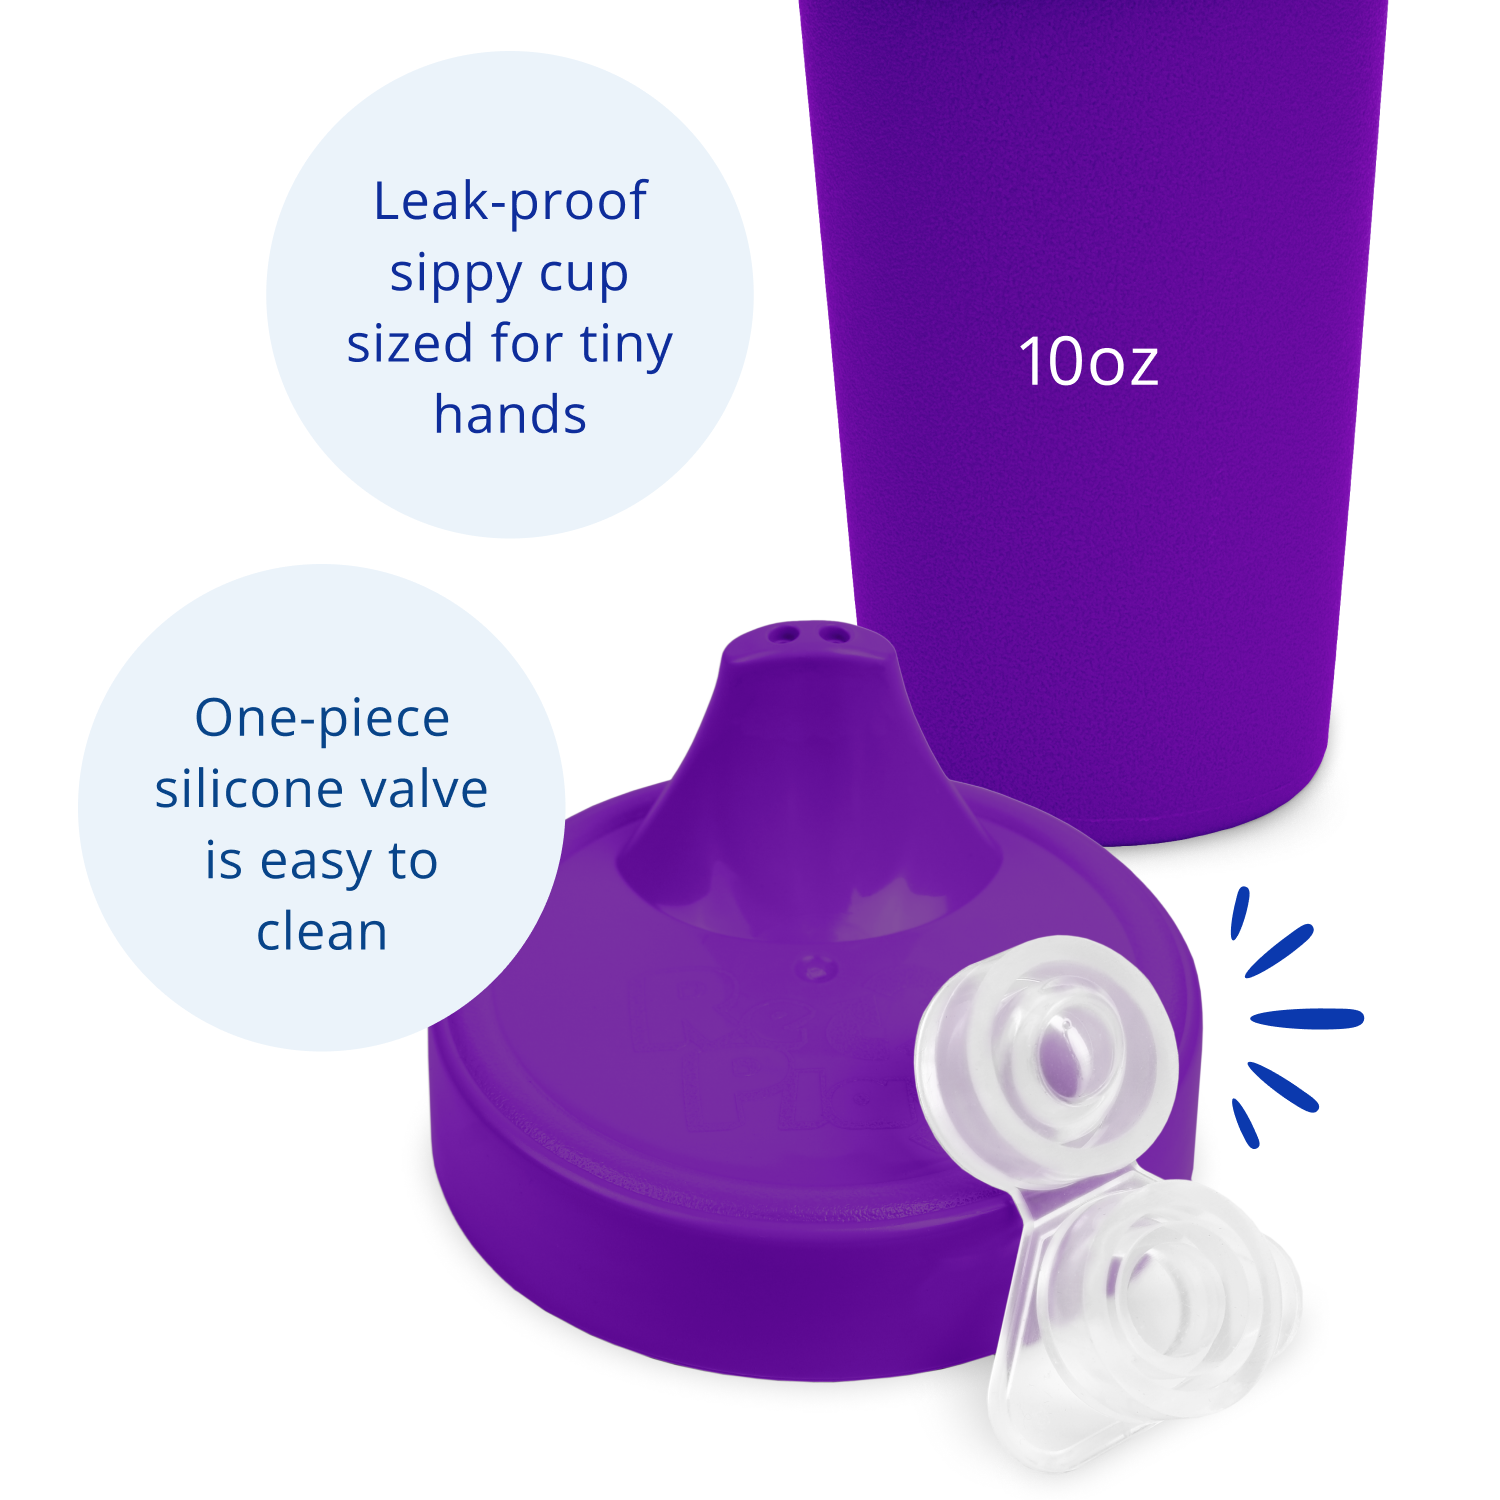 Re-Play No-Spill Sippy Cup – Baby Go Round, Inc.